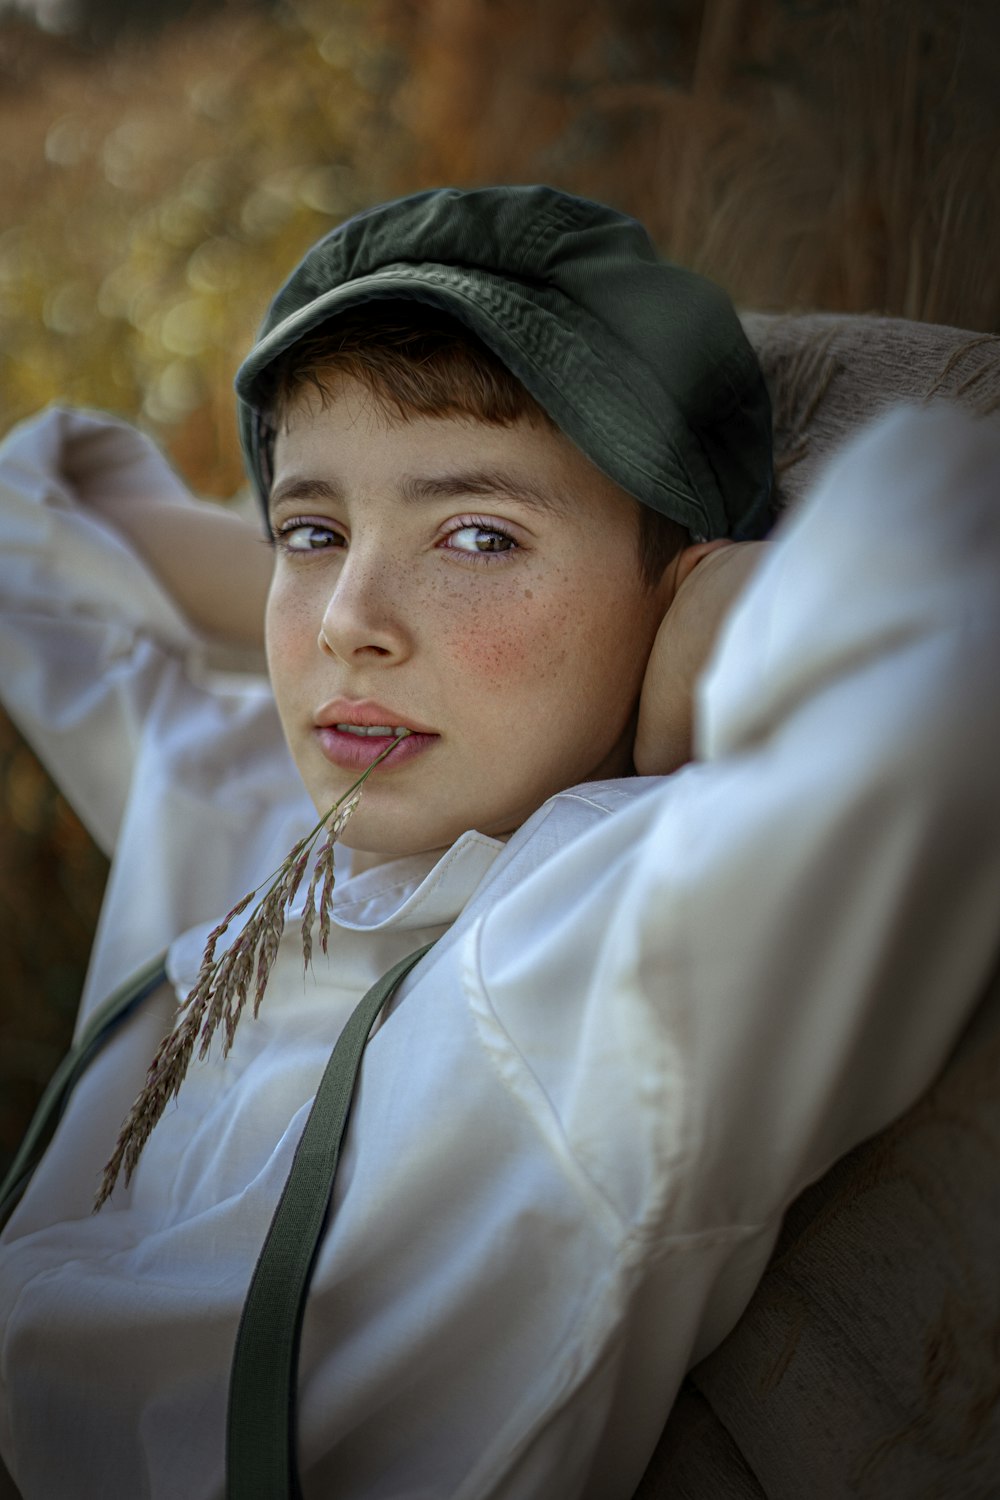 a young boy wearing a green hat sitting in a chair